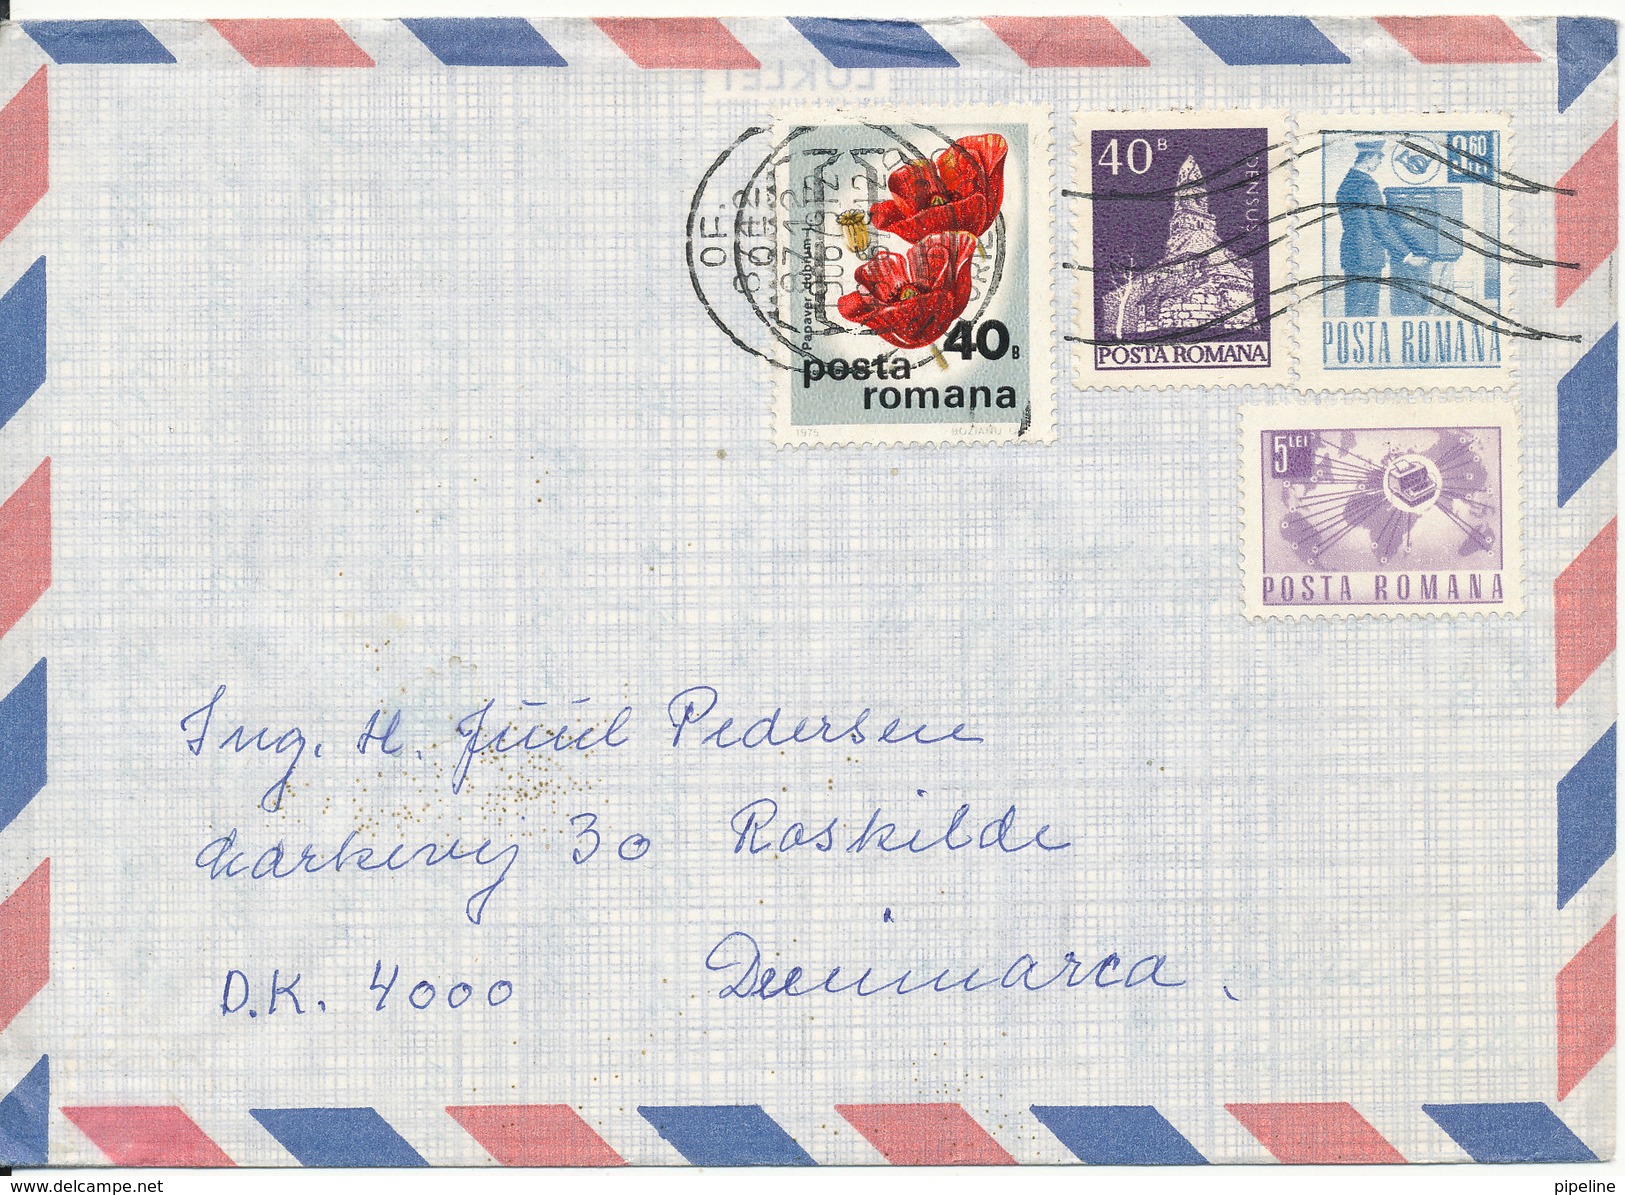 Romania Air Mail Cover Sent To Denmark 19-6-1979 - Covers & Documents